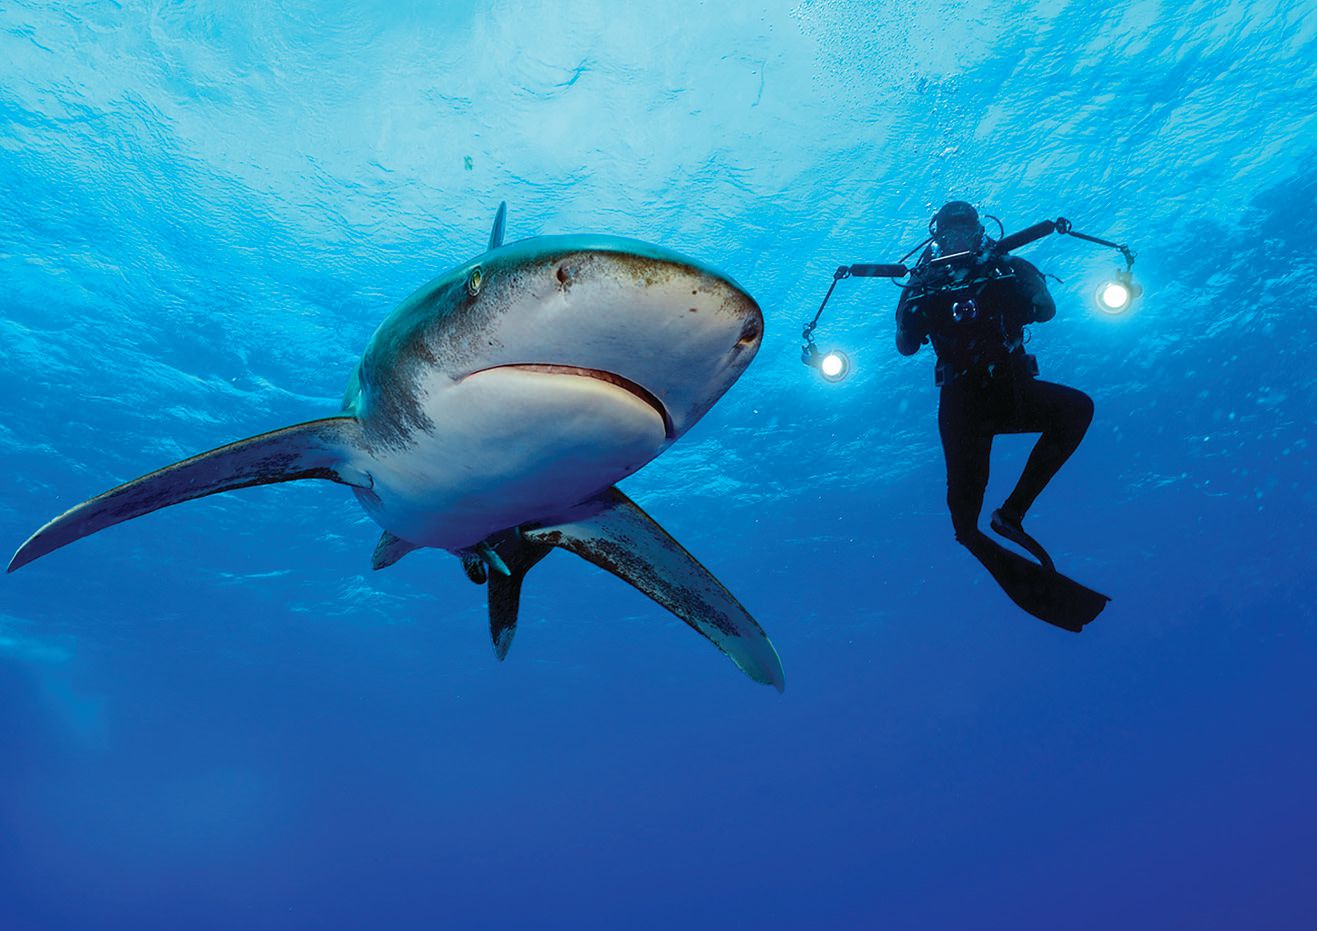 Go under the sea with photographer Brian Skerry at The Smith Center July 16. PHOTO BY BRIAN SKERRY